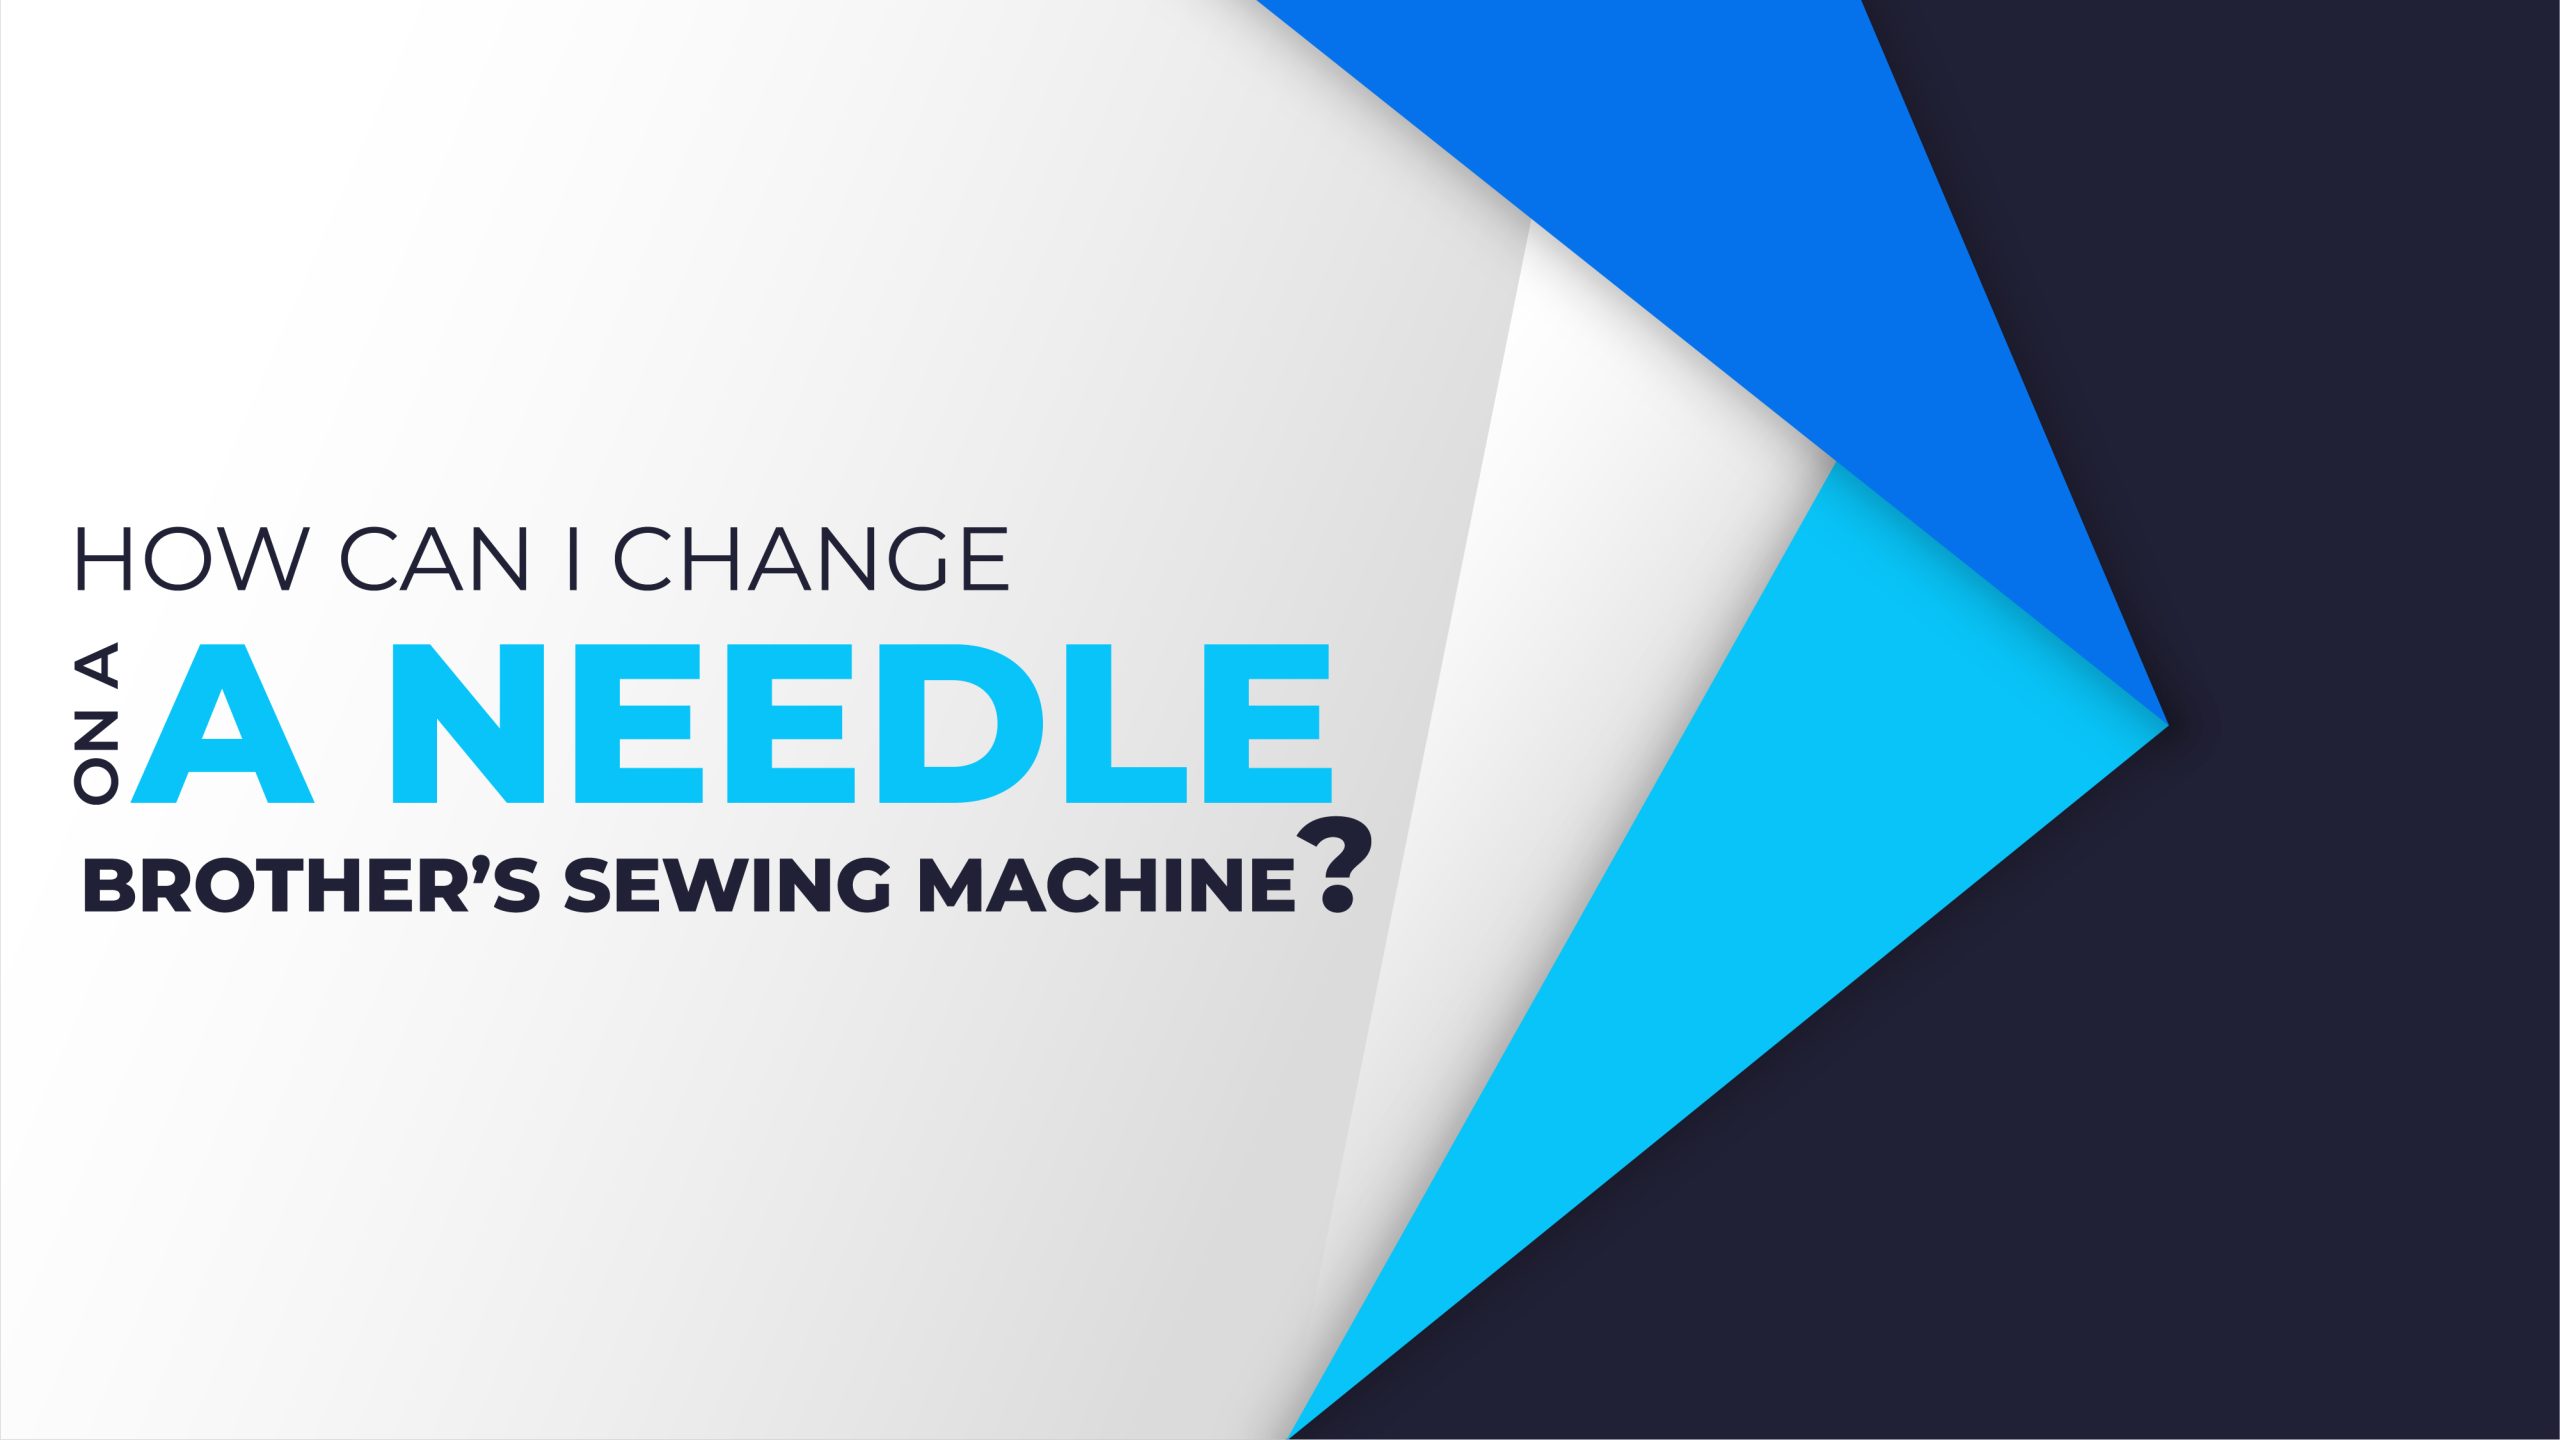 How can I change a needle on a brother’s sewing machine?